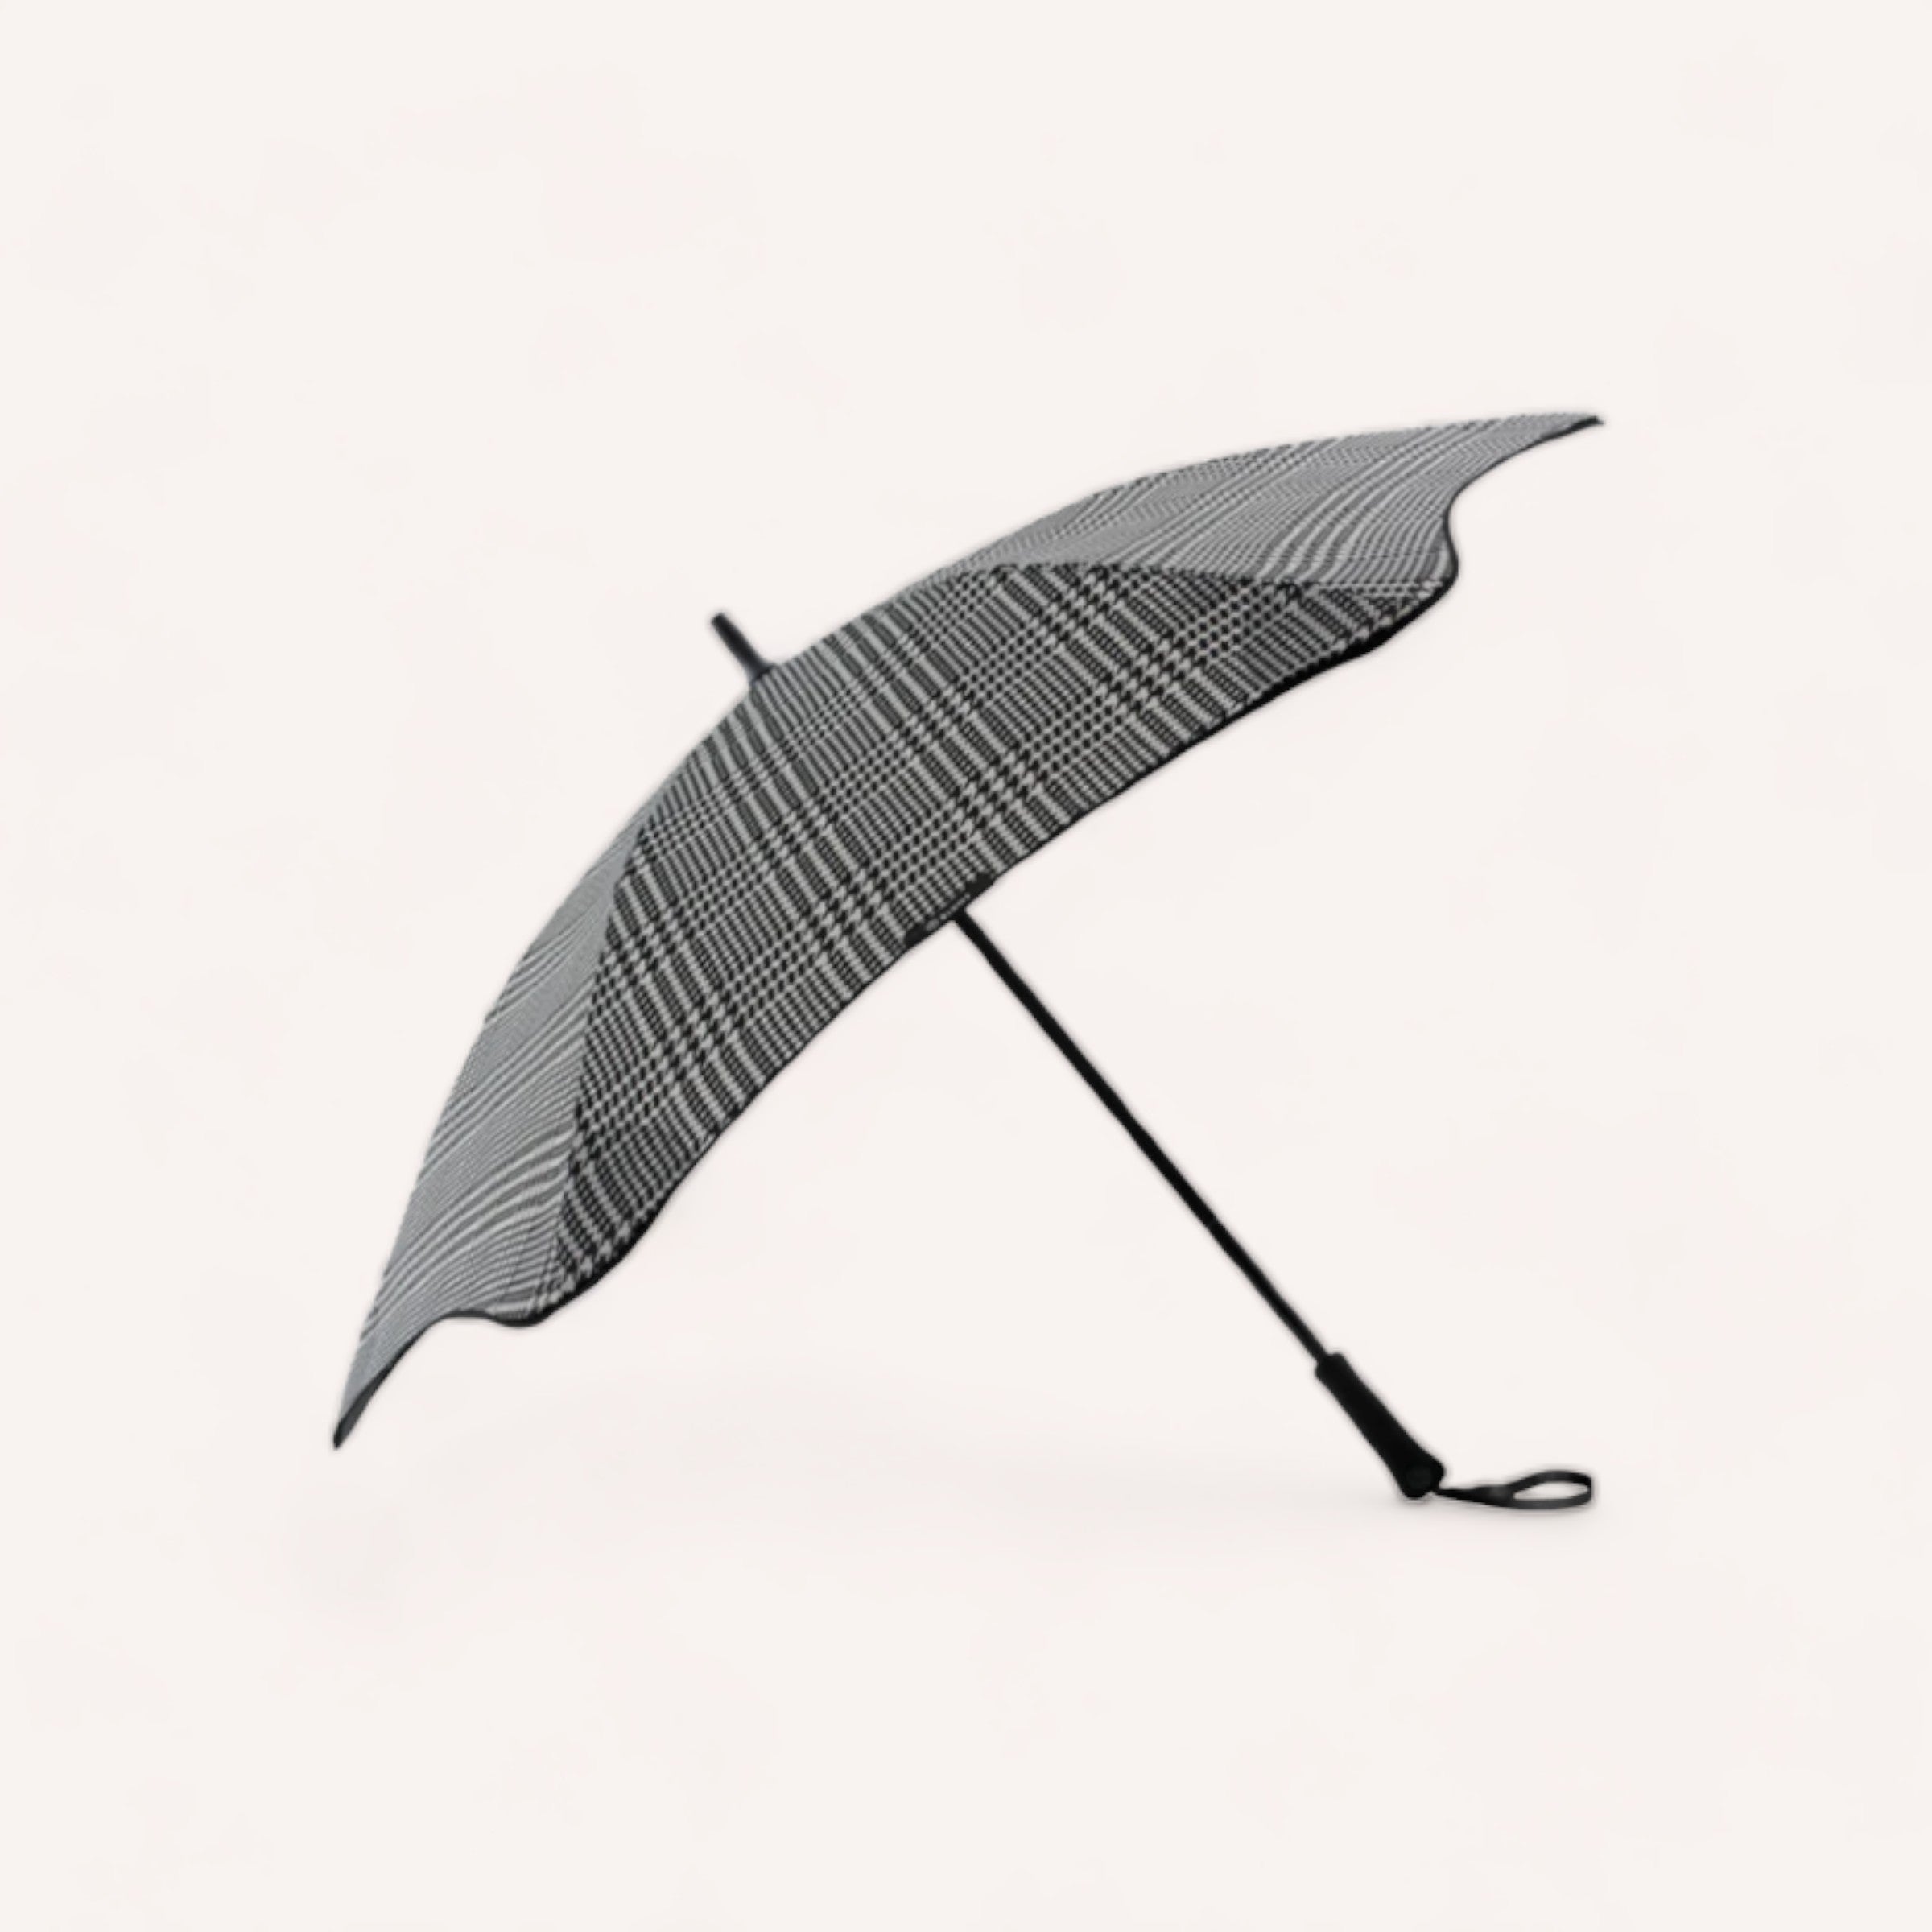 A BLUNT Metro Umbrella Houndstooth - Limited Edition open and angled against a plain white background.